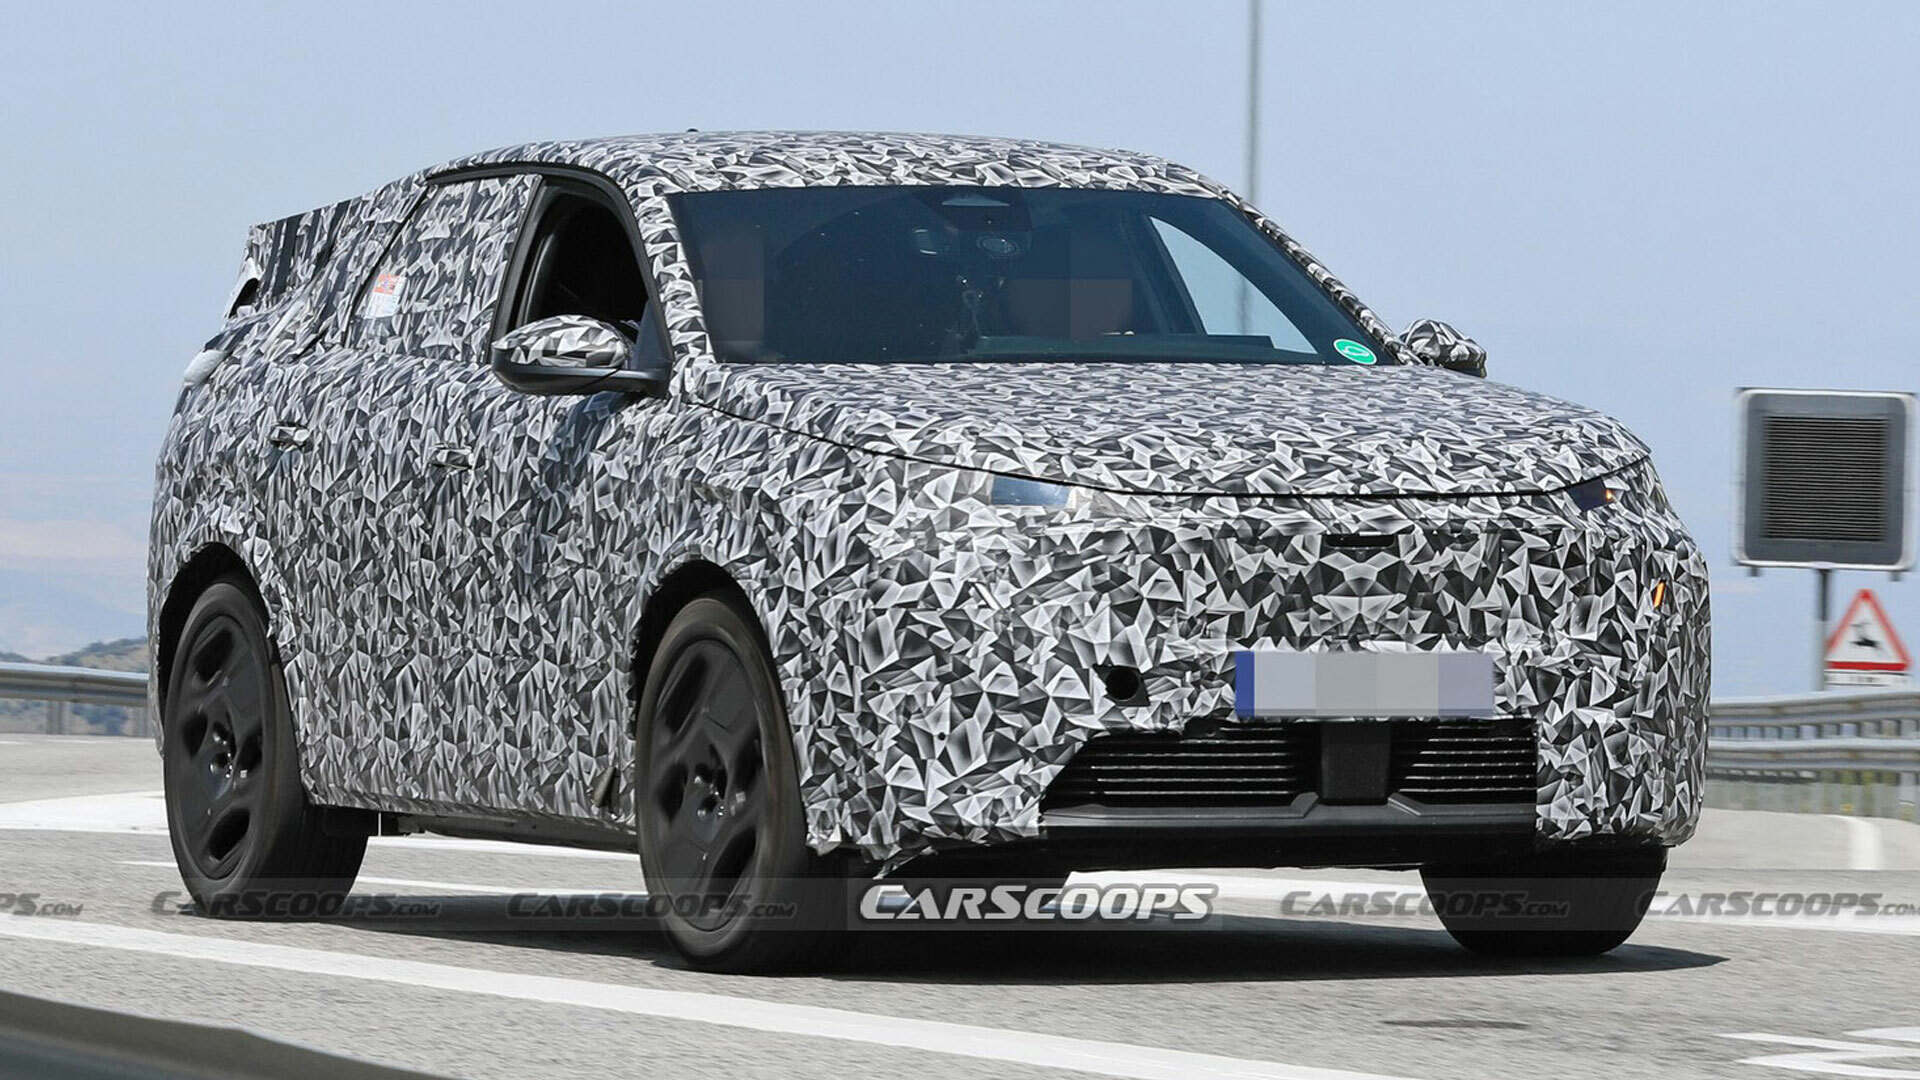 2024 Peugeot 3008 Spied Preparing For Fall Debut | Carscoops